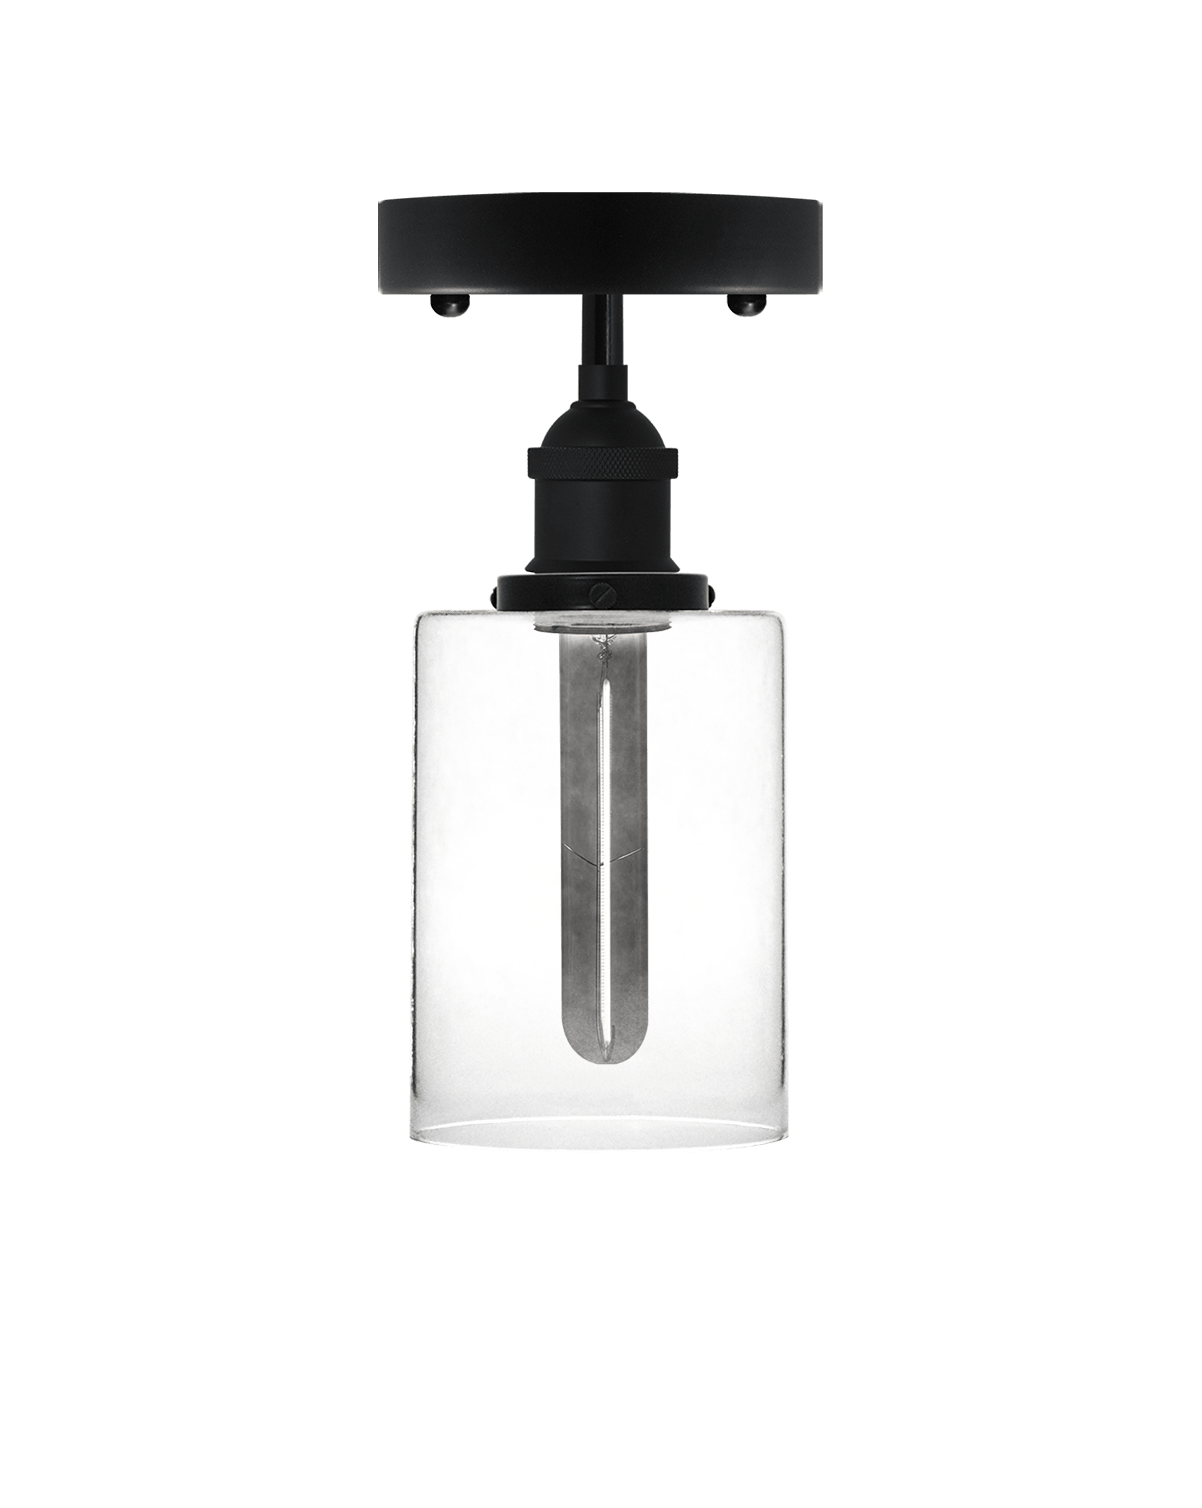 Semi-flush mount light fixture with a black base and a clear cylindrical glass shade.